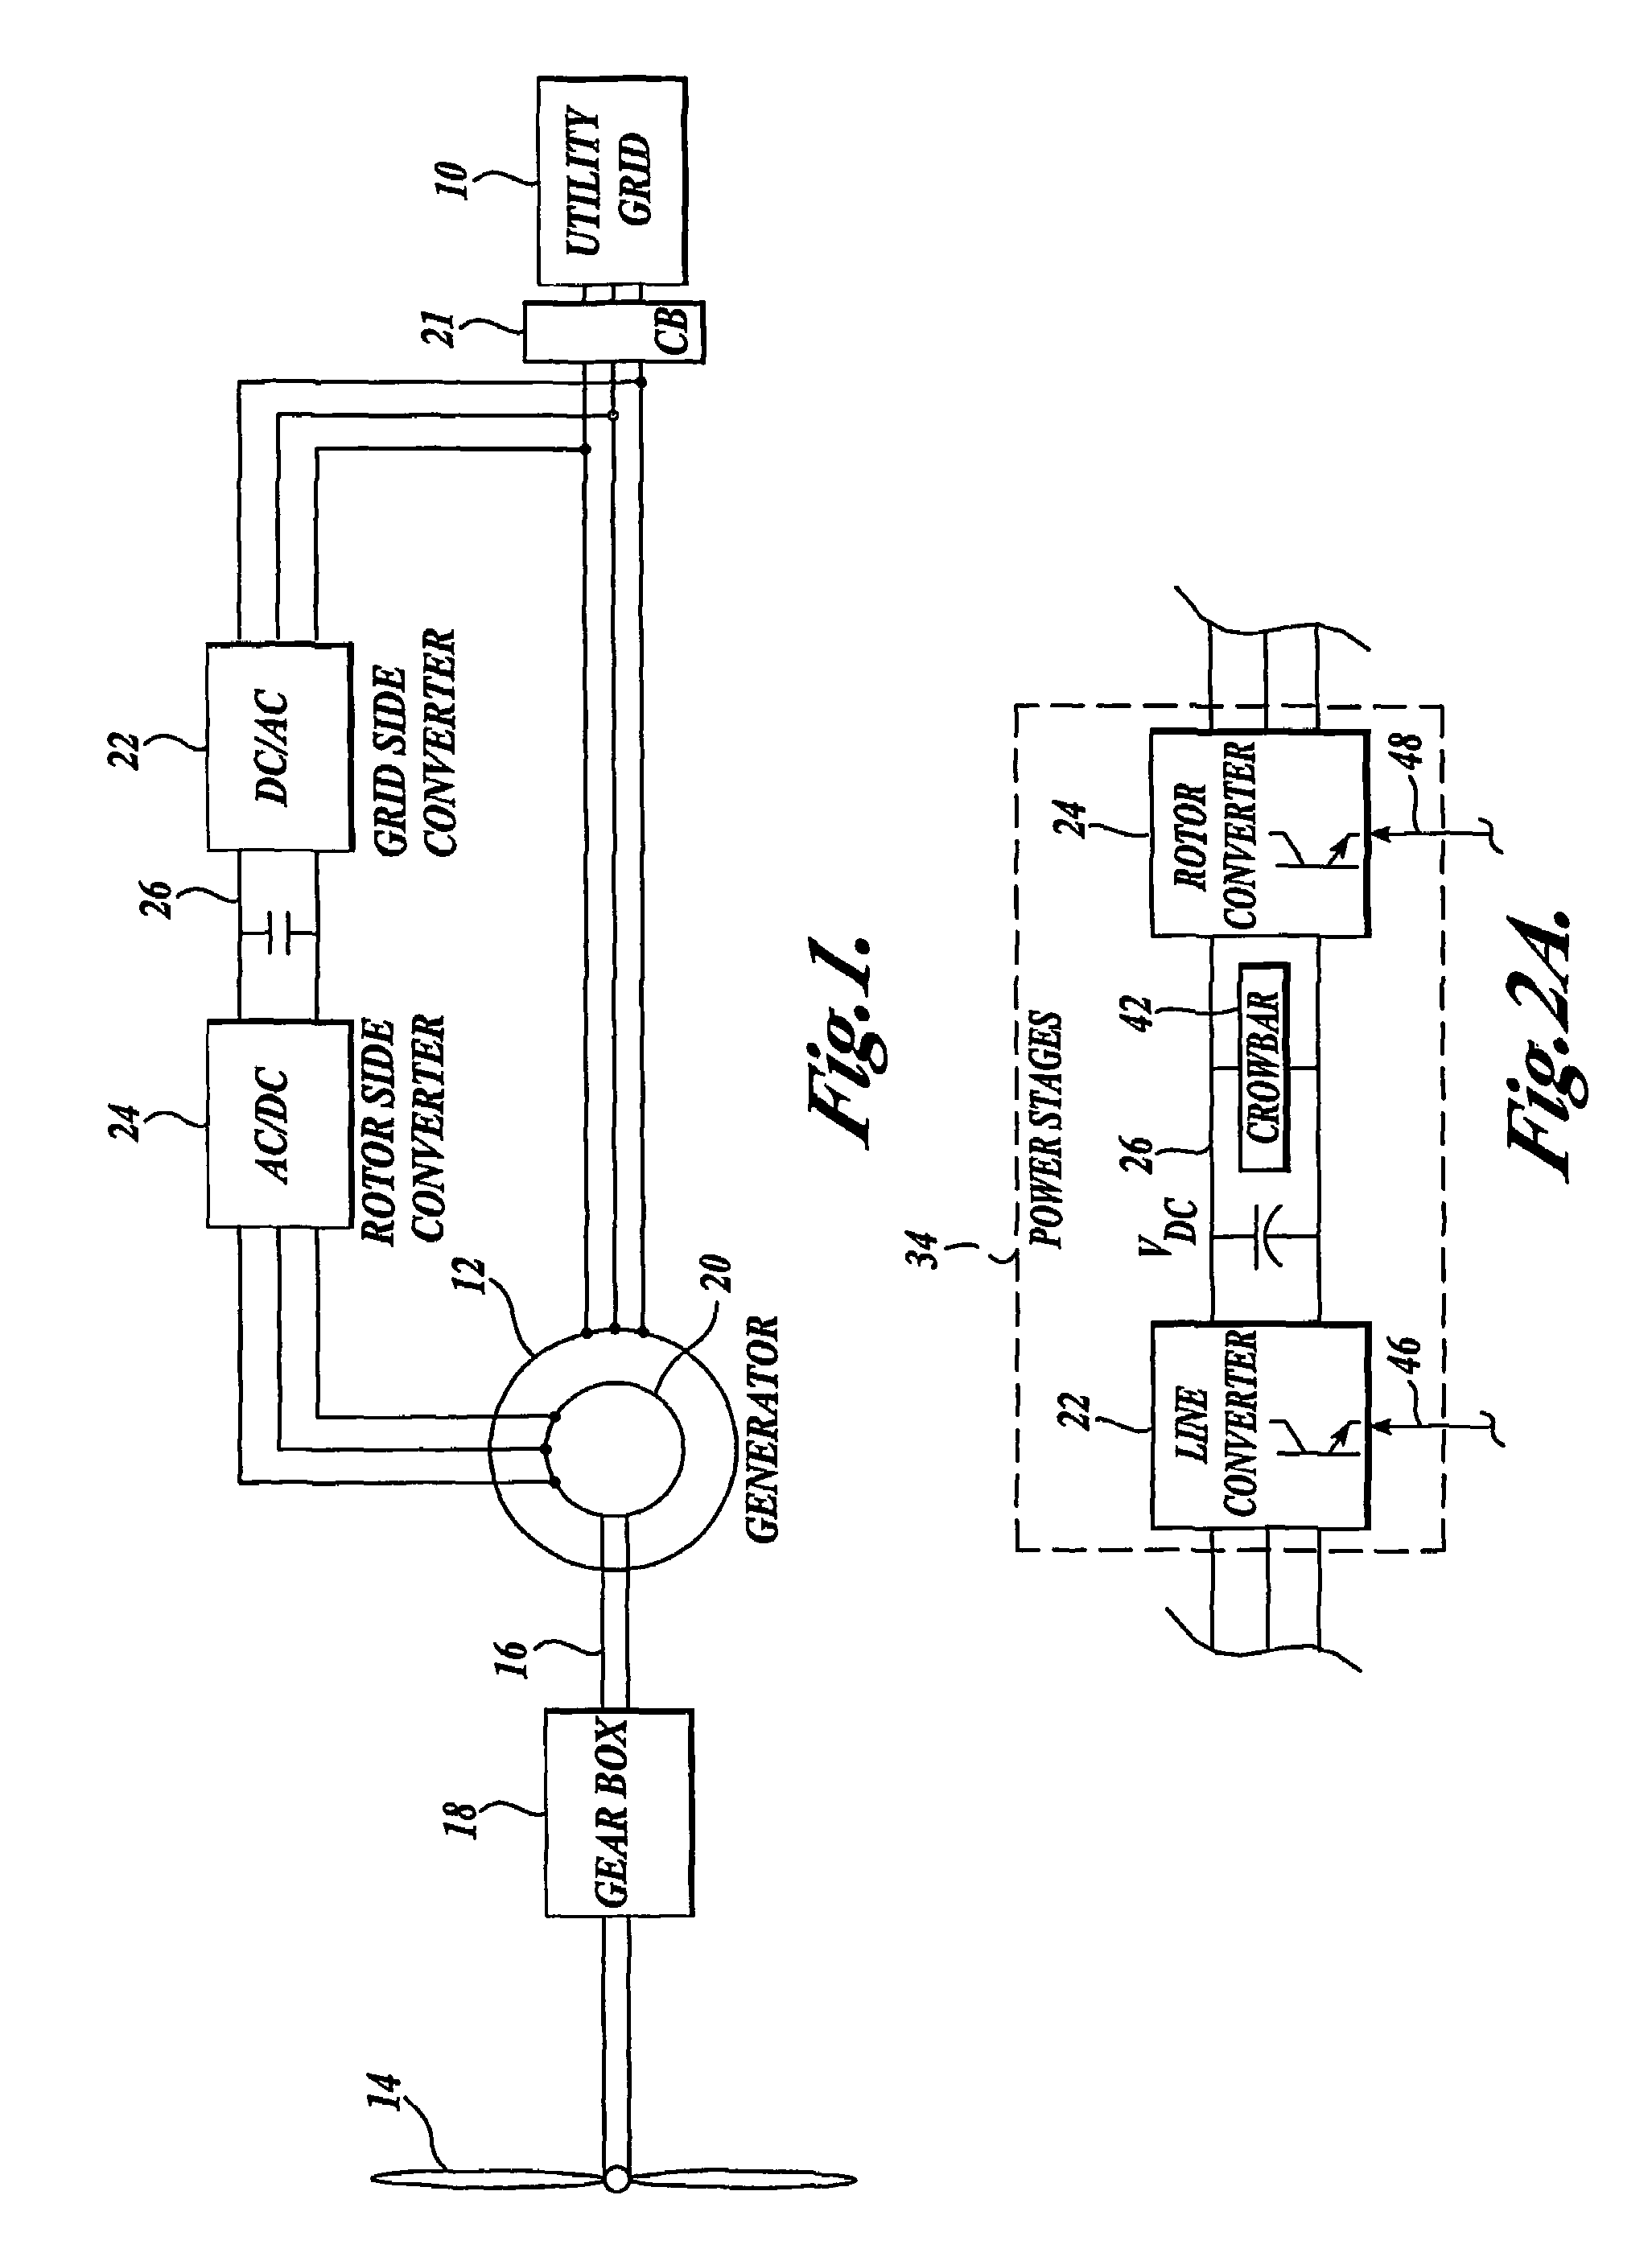 Control system for doubly fed induction generator